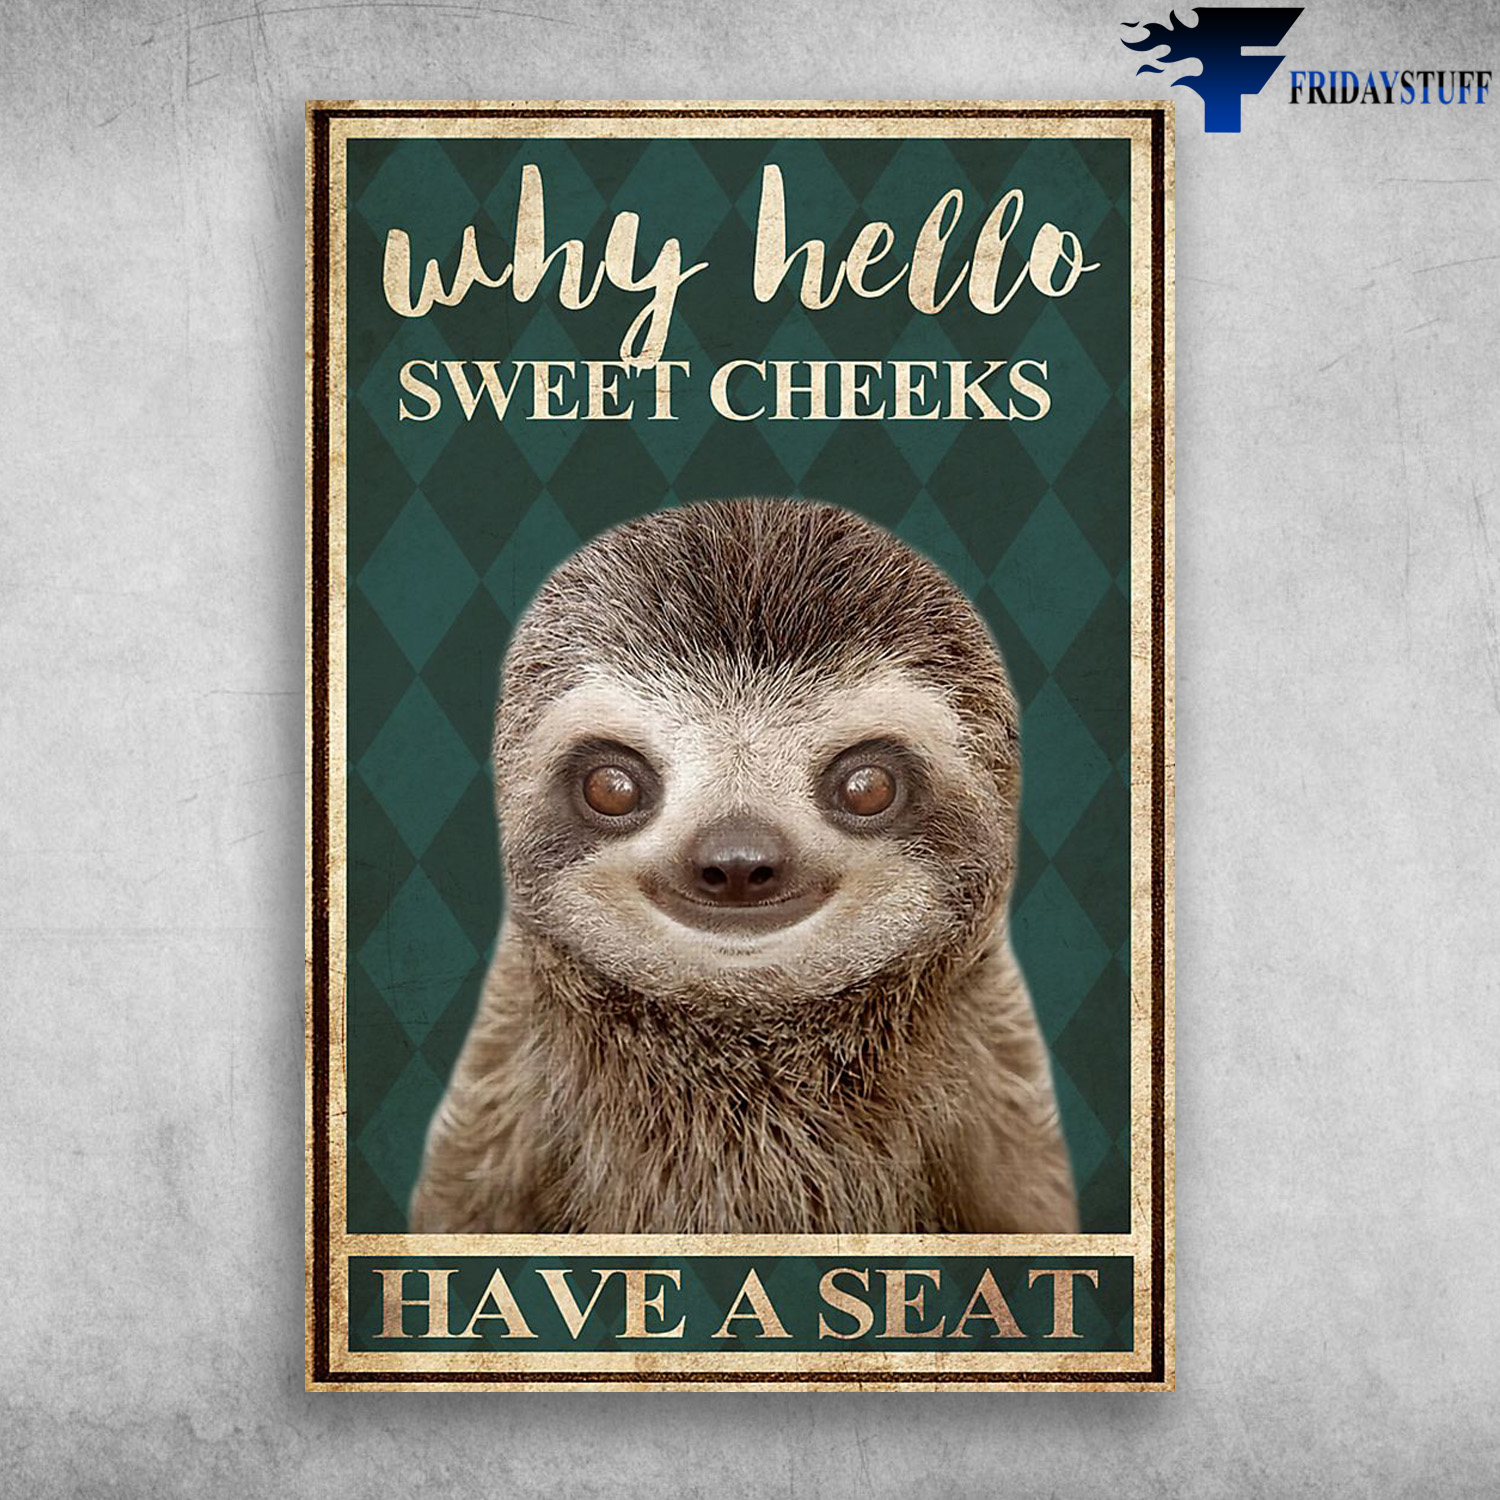 Cute Sloth - Why Hello, Sweet Cheeks, Have A Seat